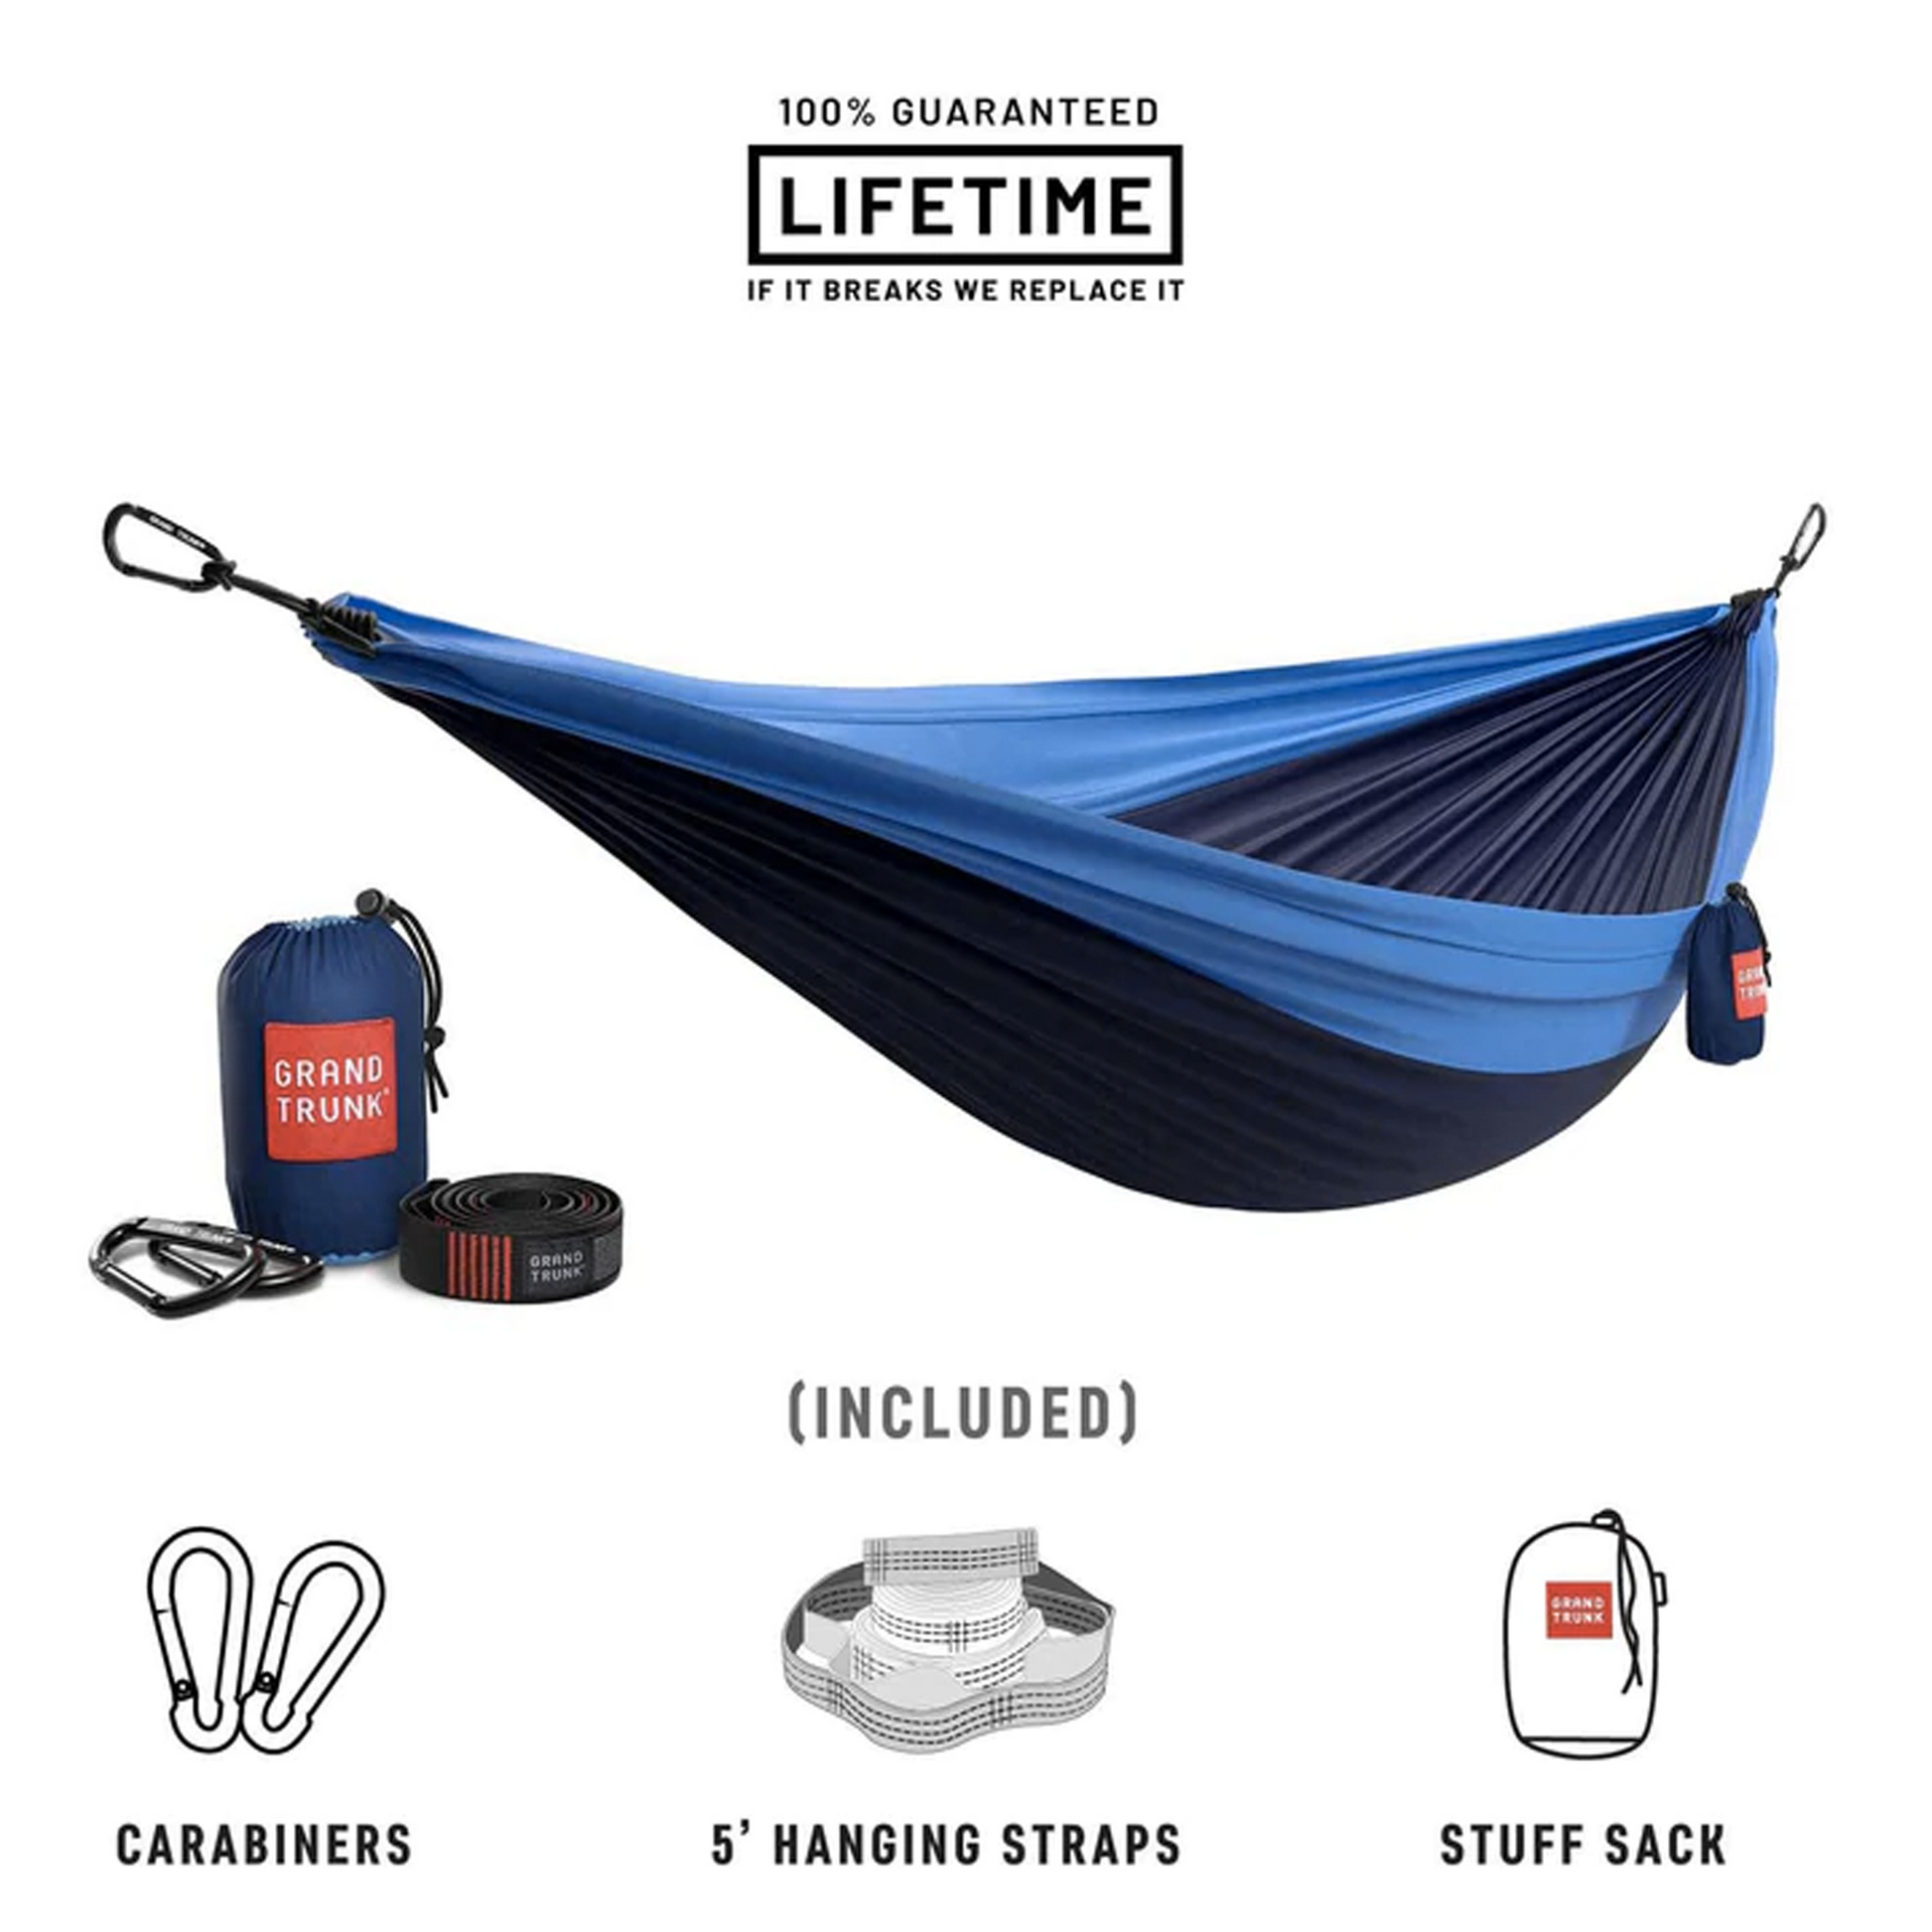 Double Deluxe Hammock with Straps Big Adventure Outfitters